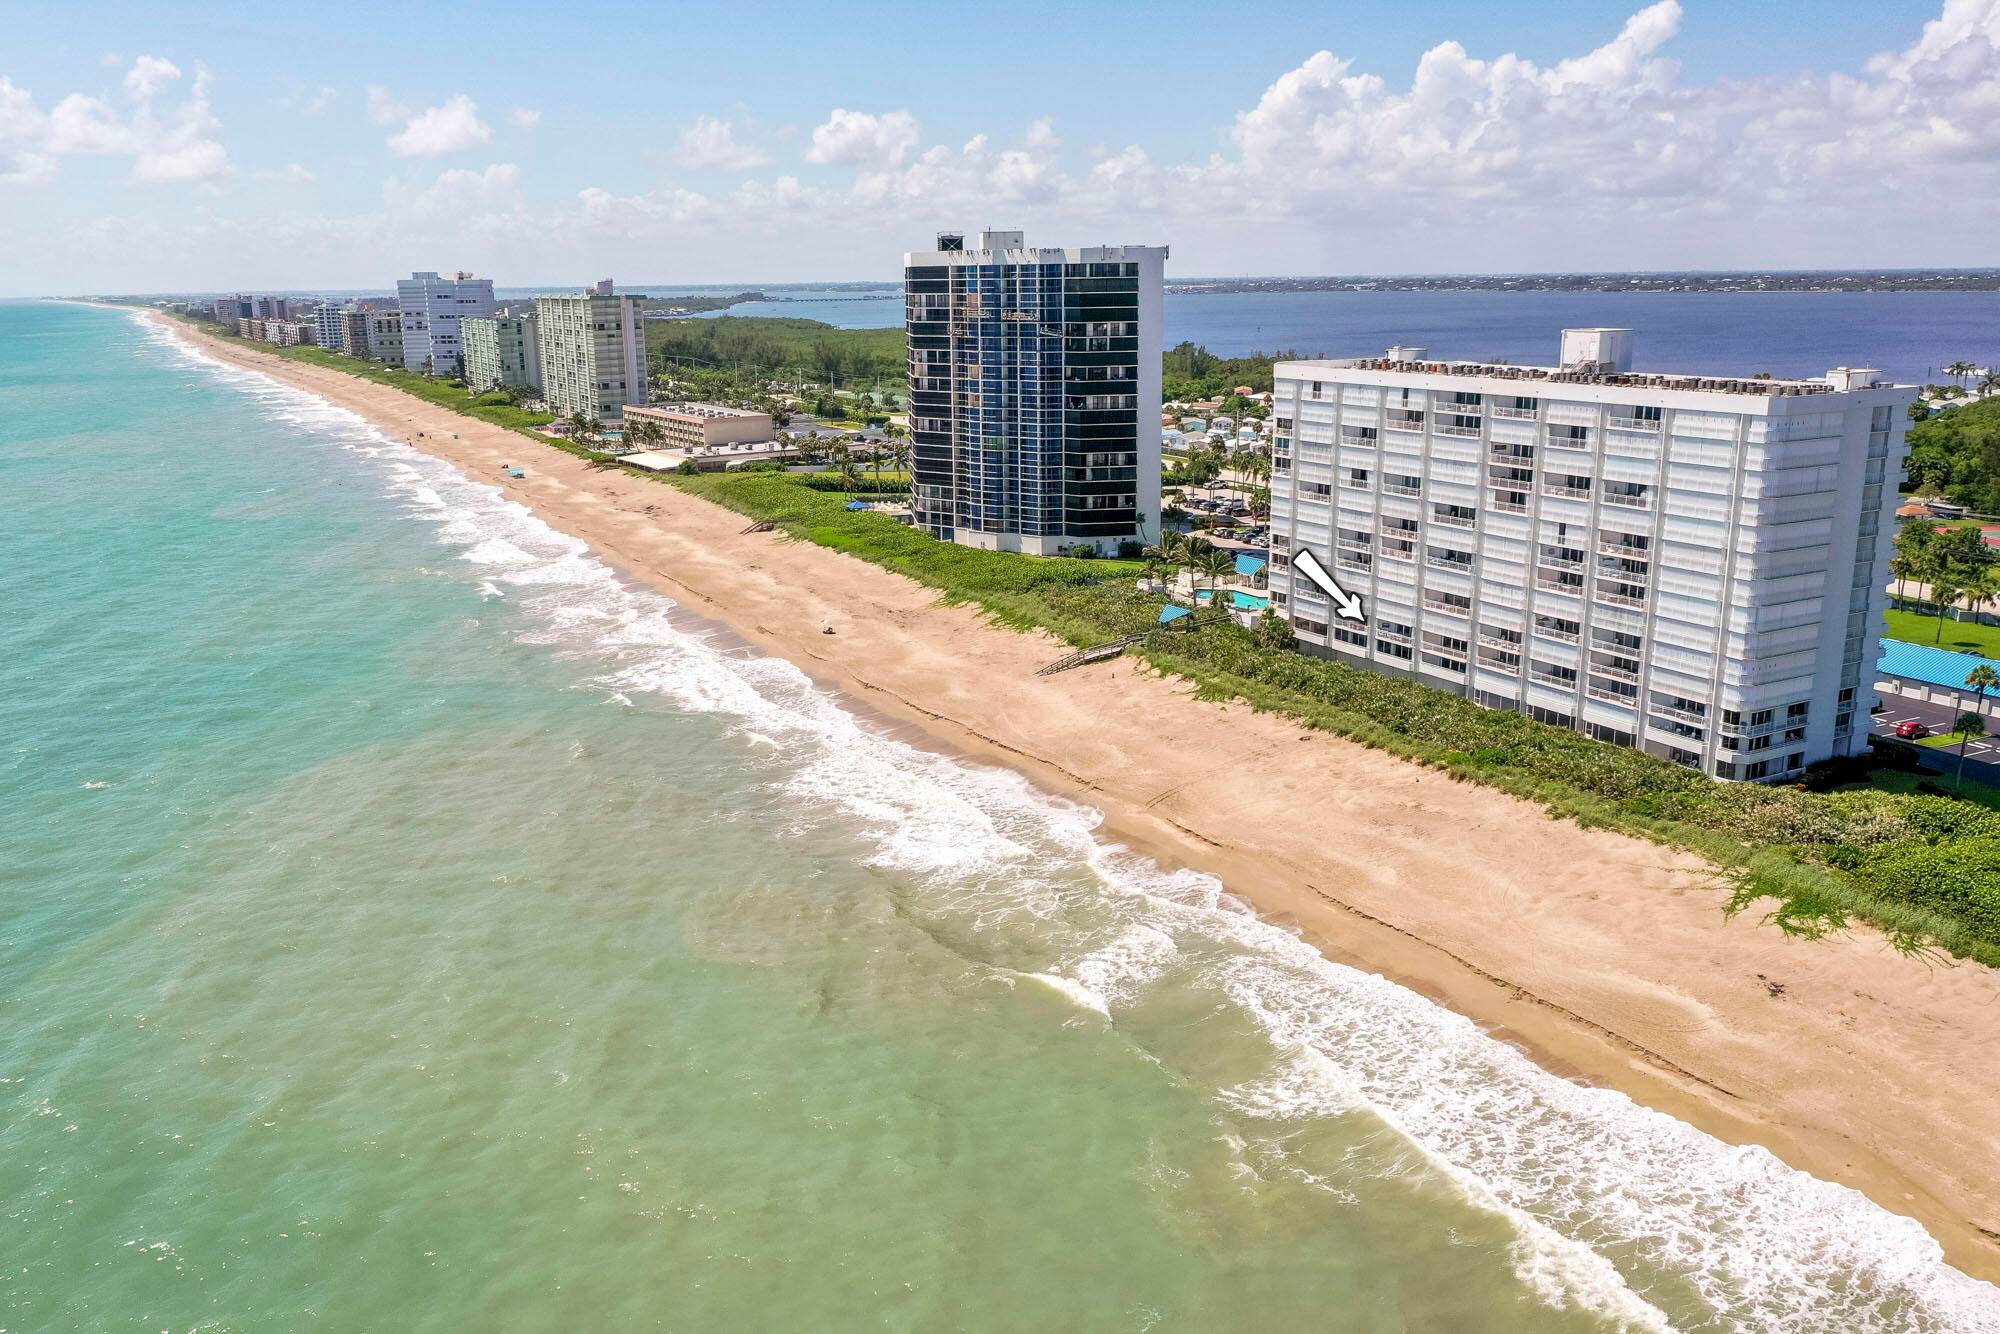 Enjoy oceanfront living at its finest and take in breathtaking views in this 2BD 2BA recently renovated condo.